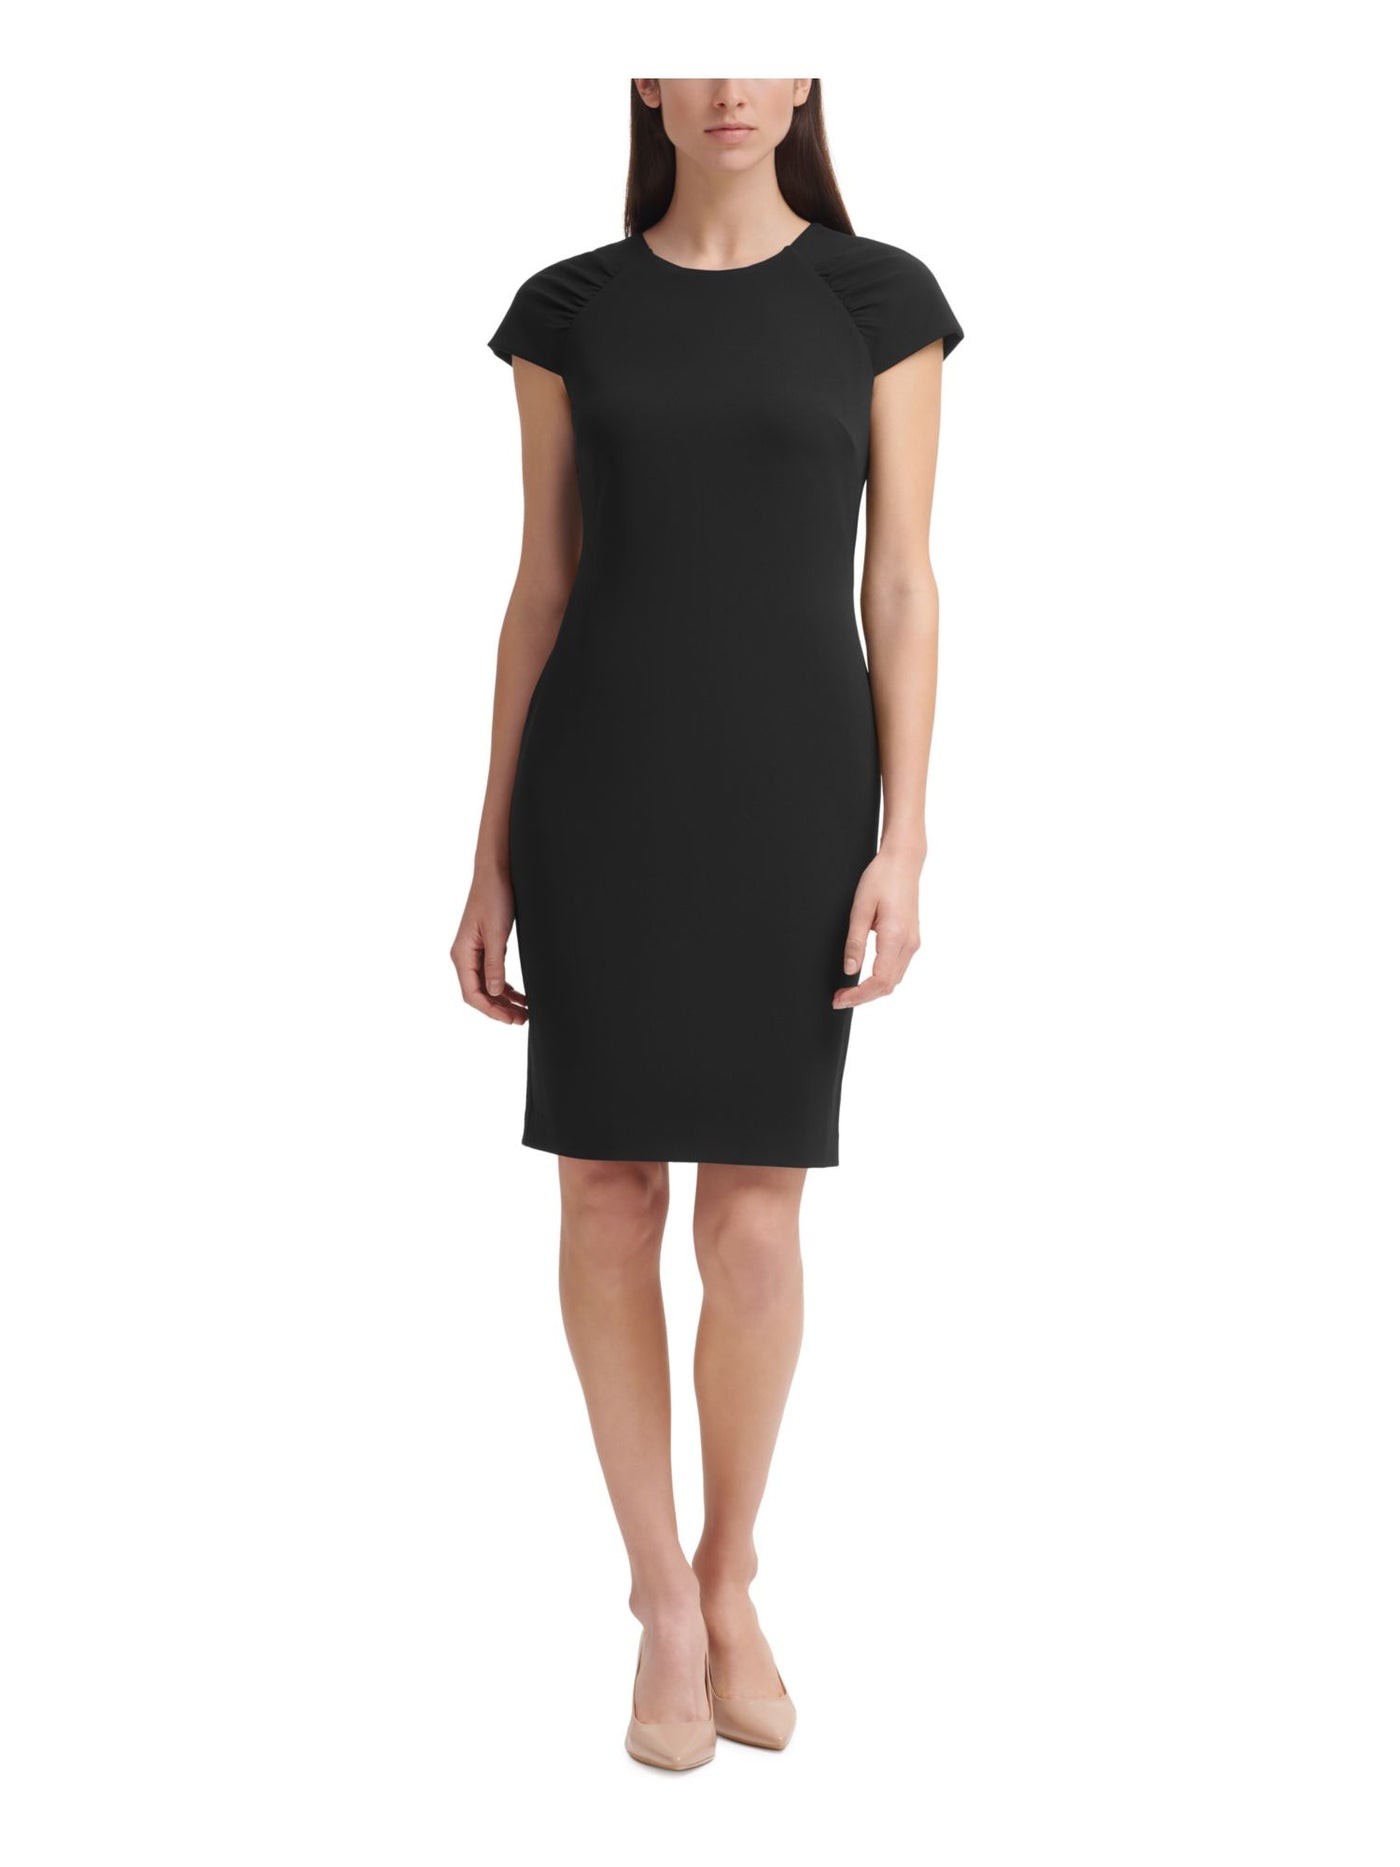 CALVIN KLEIN Womens Black Zippered Ruched Darted Unlined Cap Sleeve Round Neck Above The Knee Wear To Work Sheath Dress 6